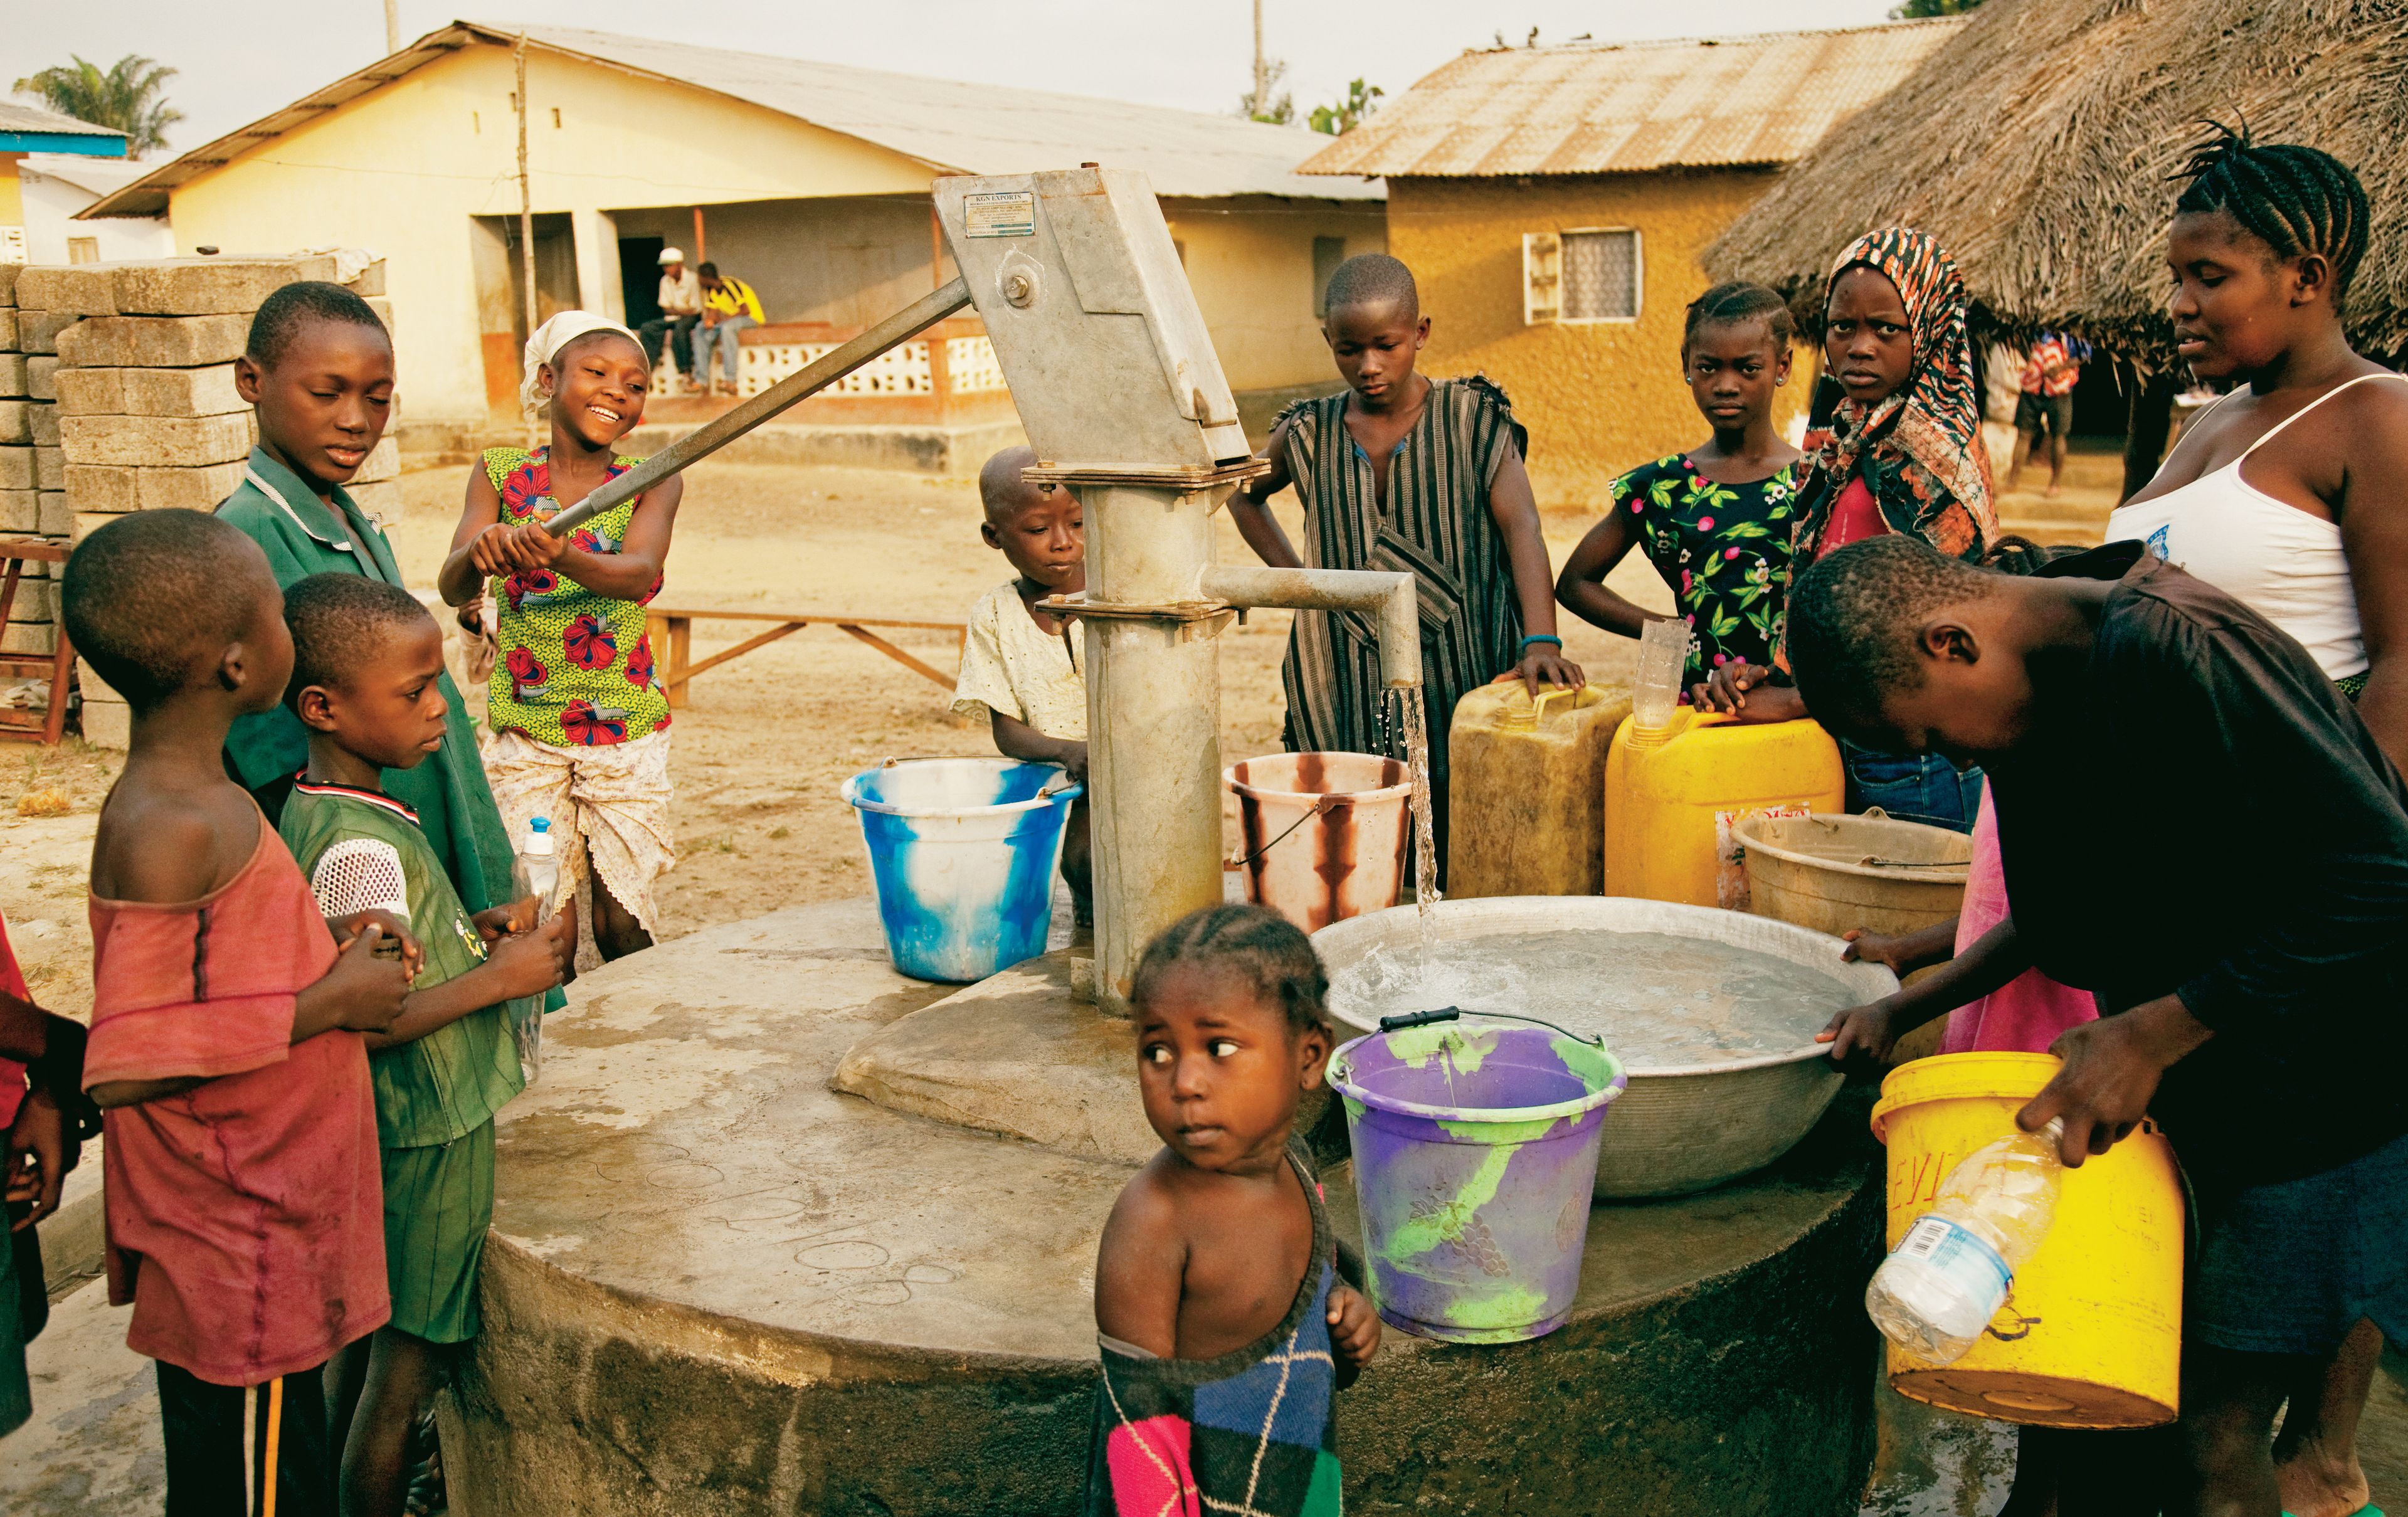 African children and teenagers gather around with buckets while a young woman operates the water pump.